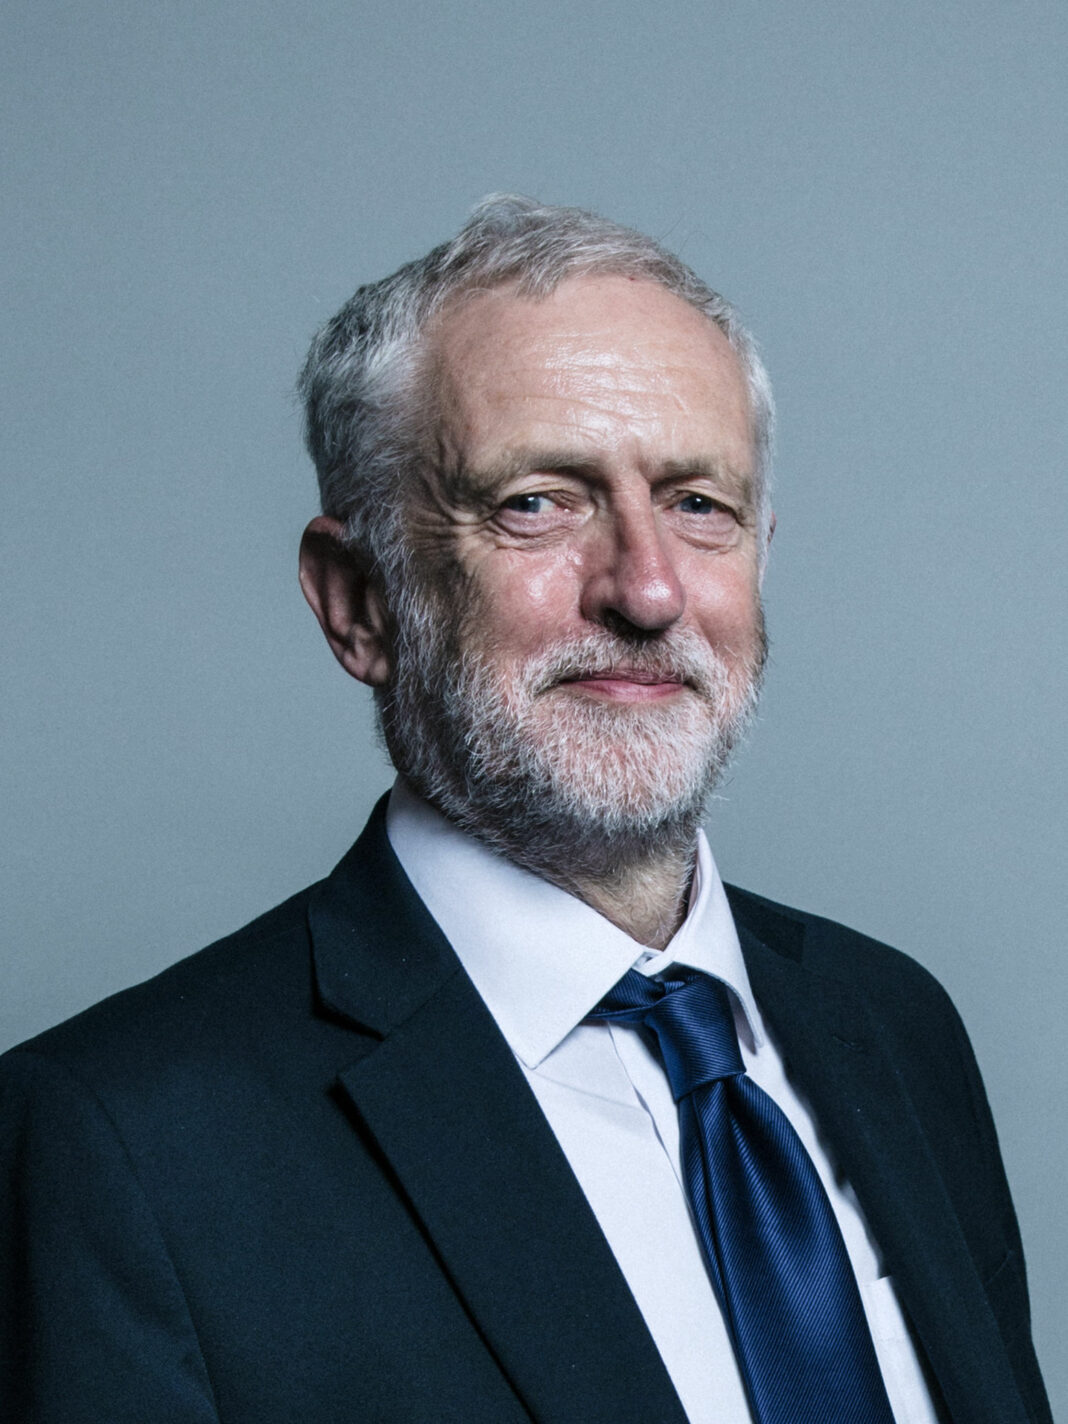 A portrait of Jeremy Corbyn, former leader of the Labour Party.